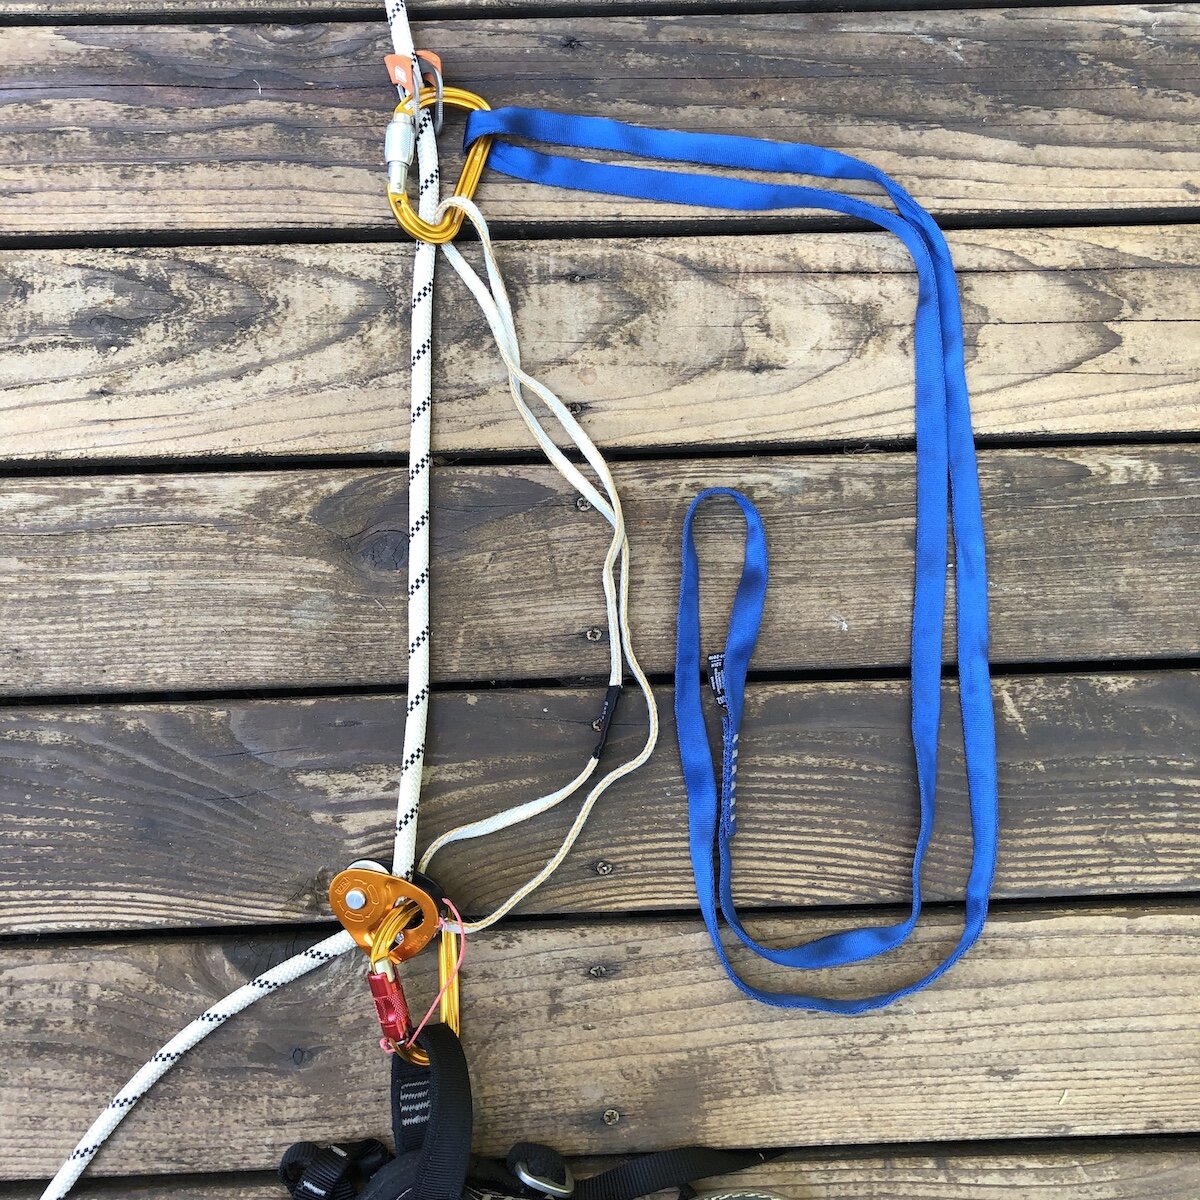 Petzl RESCUCENDER Rescue Climbing ropegrab One Piece Design No Pins Or Wires 